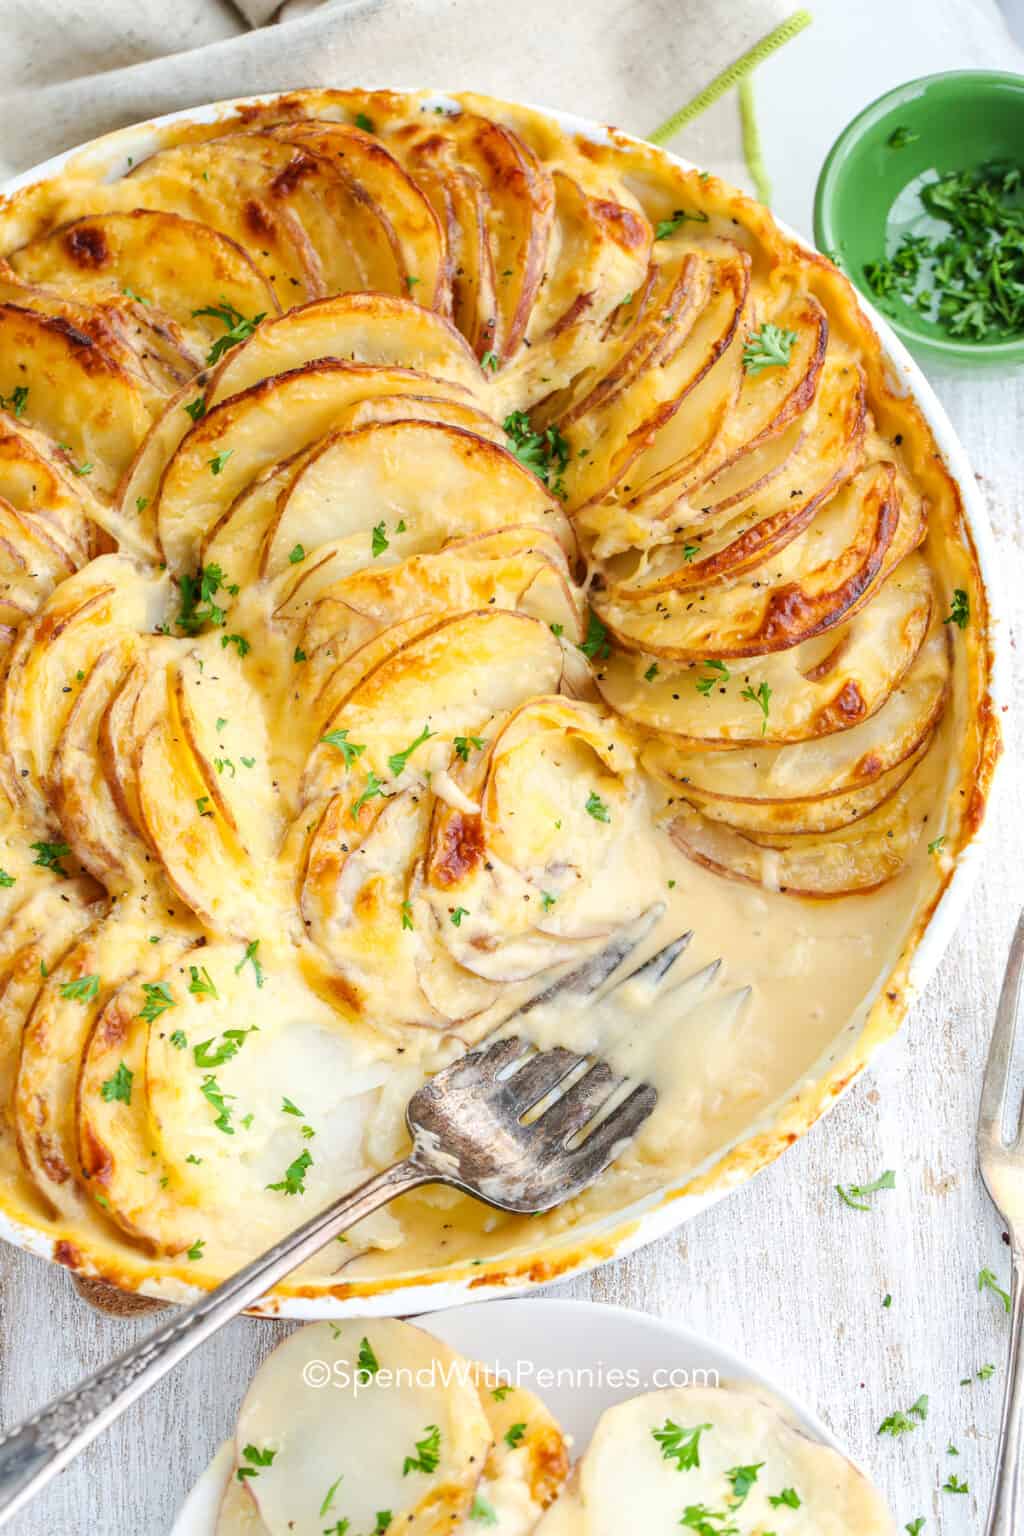 Potato au gratin topped with melted cheese and garnished with fresh parsley